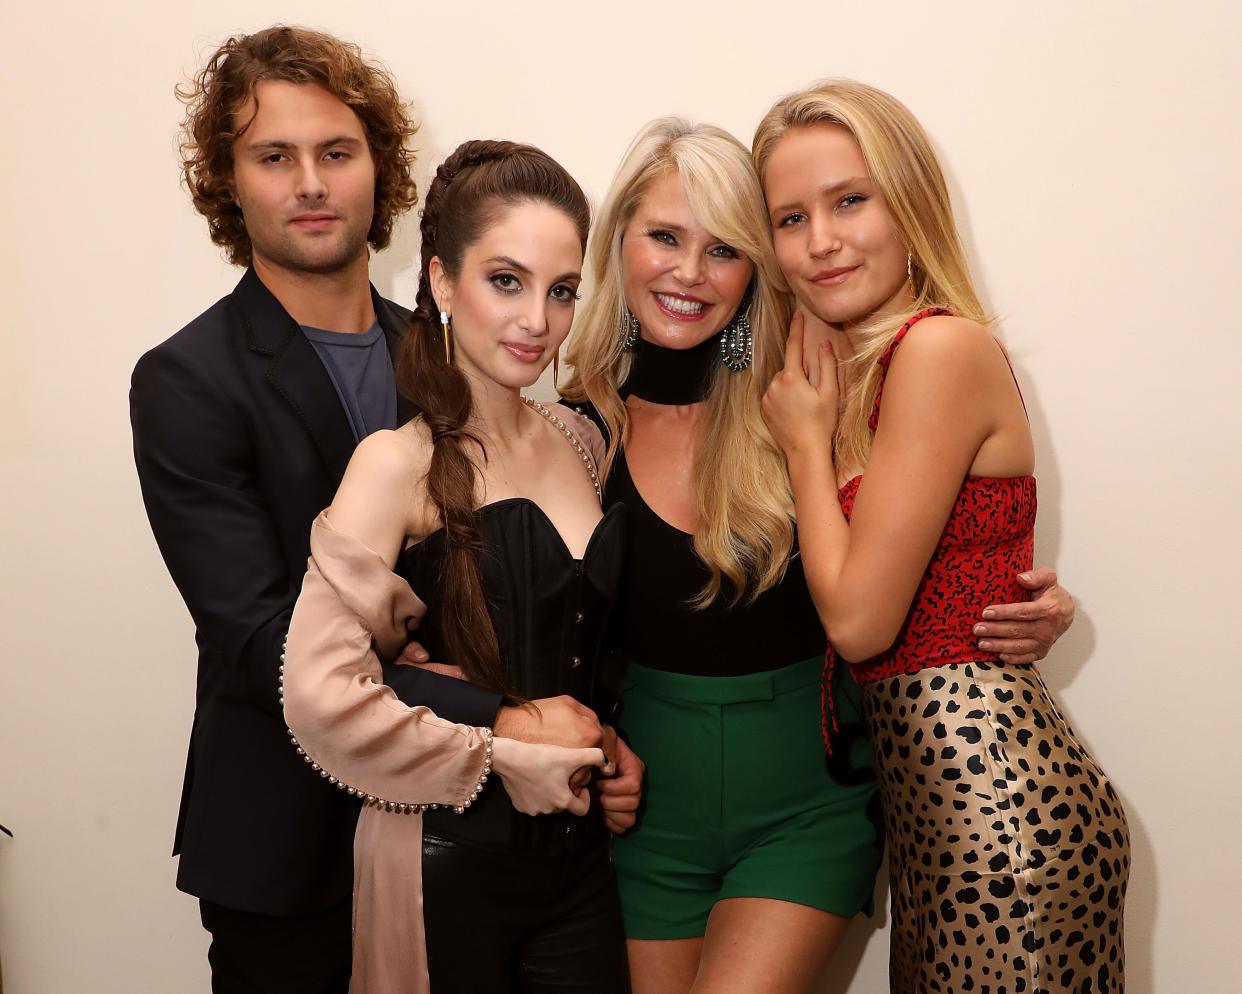 Jack Brinkley-Cook, Alexa Ray Joel, Christie Brinkley and Sailor Lee Brinkley-Cook celebrate the opening night of Alexa's residency at New York's Cafe Carlyle on Sept. 25, 2018. (Photo: Taylor Hill via Getty Images)